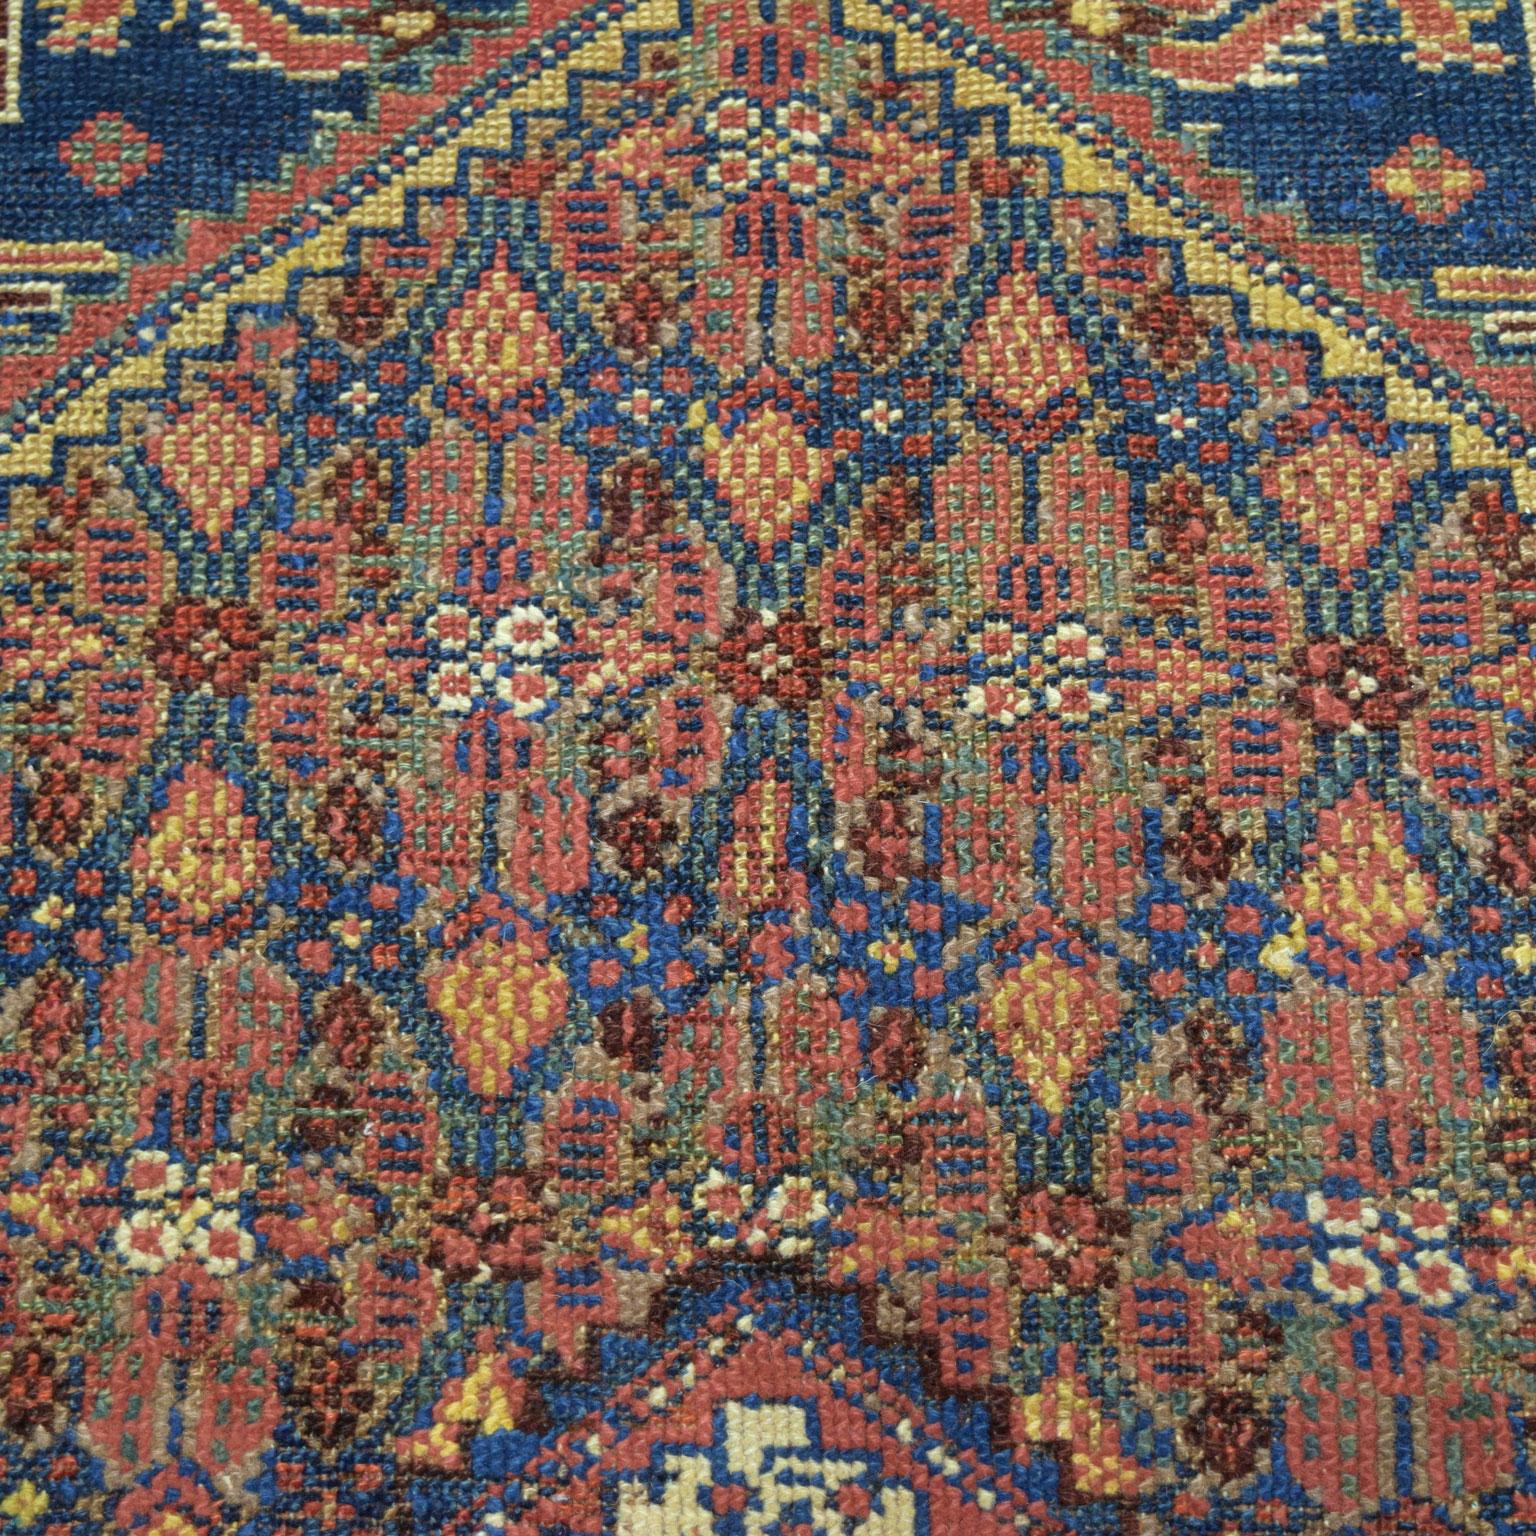 Early 20th Century Antique 1900s Wool Persian Saraband Rug, Blue, Red, and Orange, 5' x 7' For Sale